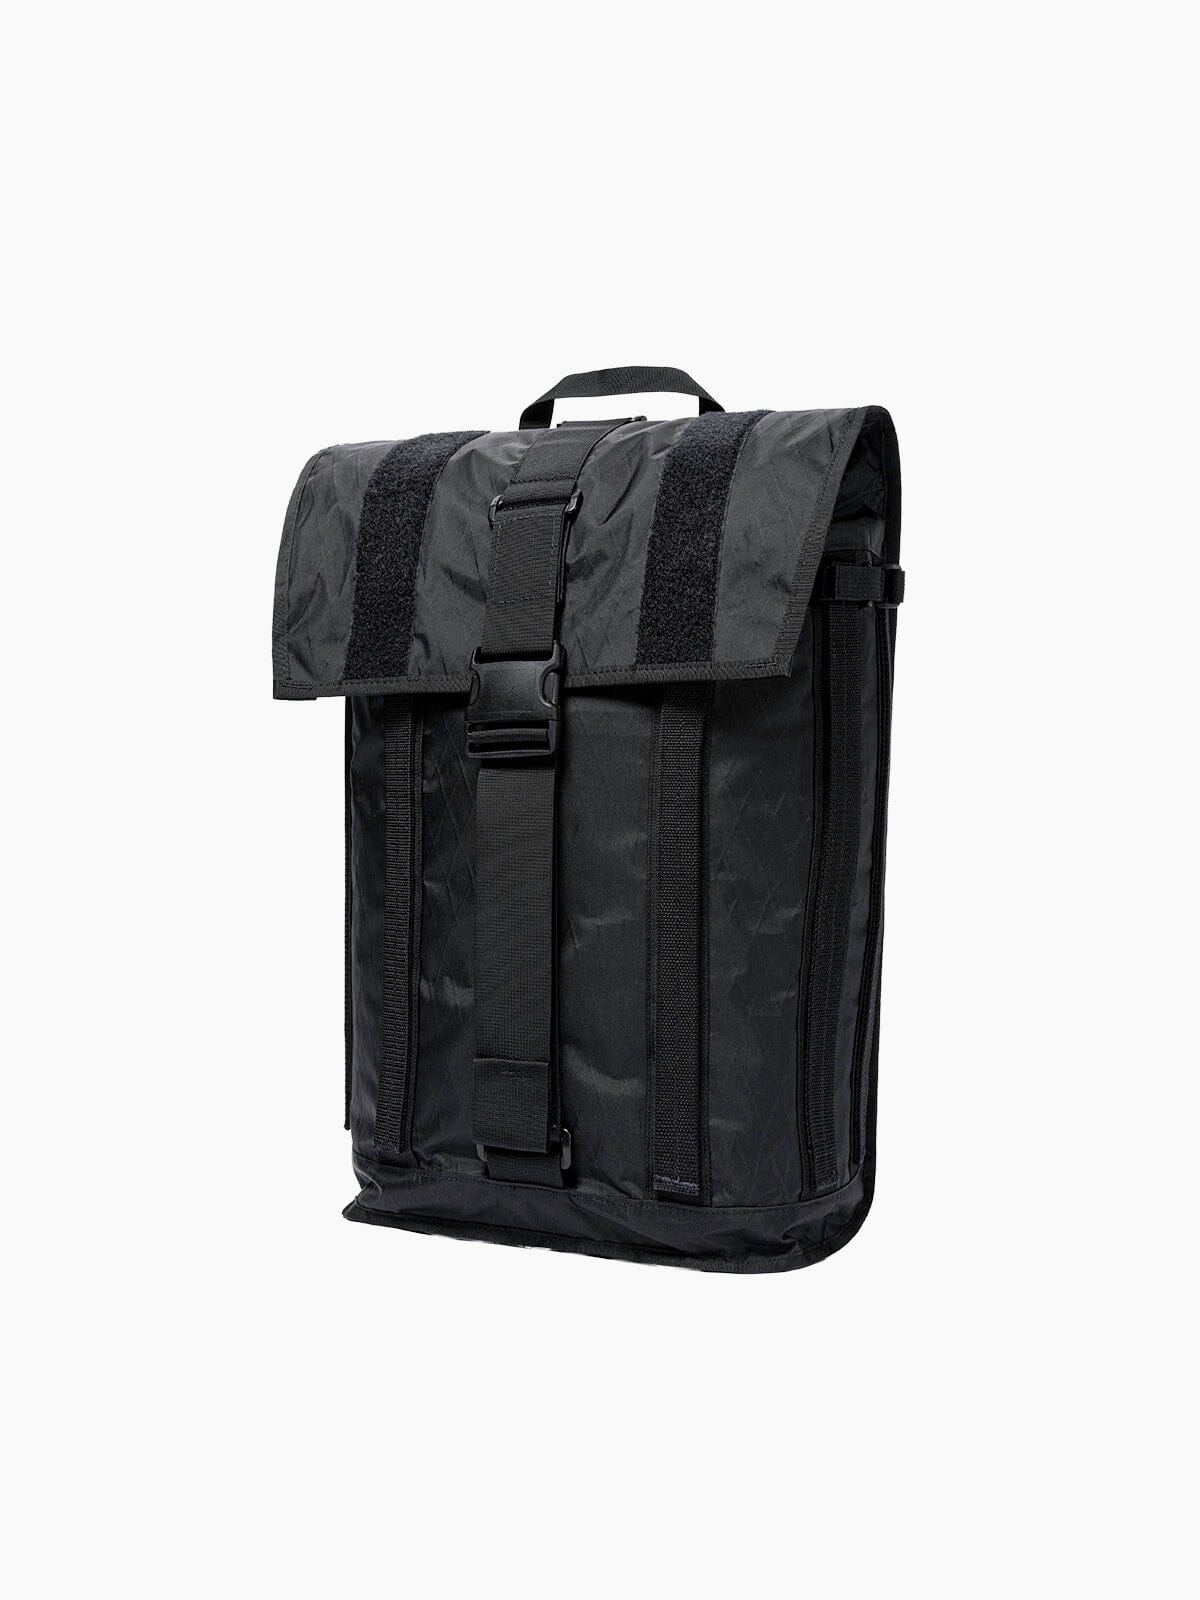 R6 Arkiv Field Pack 40L by Mission Workshop - Bolsas impermeables y ropa técnica - San Francisco & Los Angeles - Built to endure - Guaranteed forever